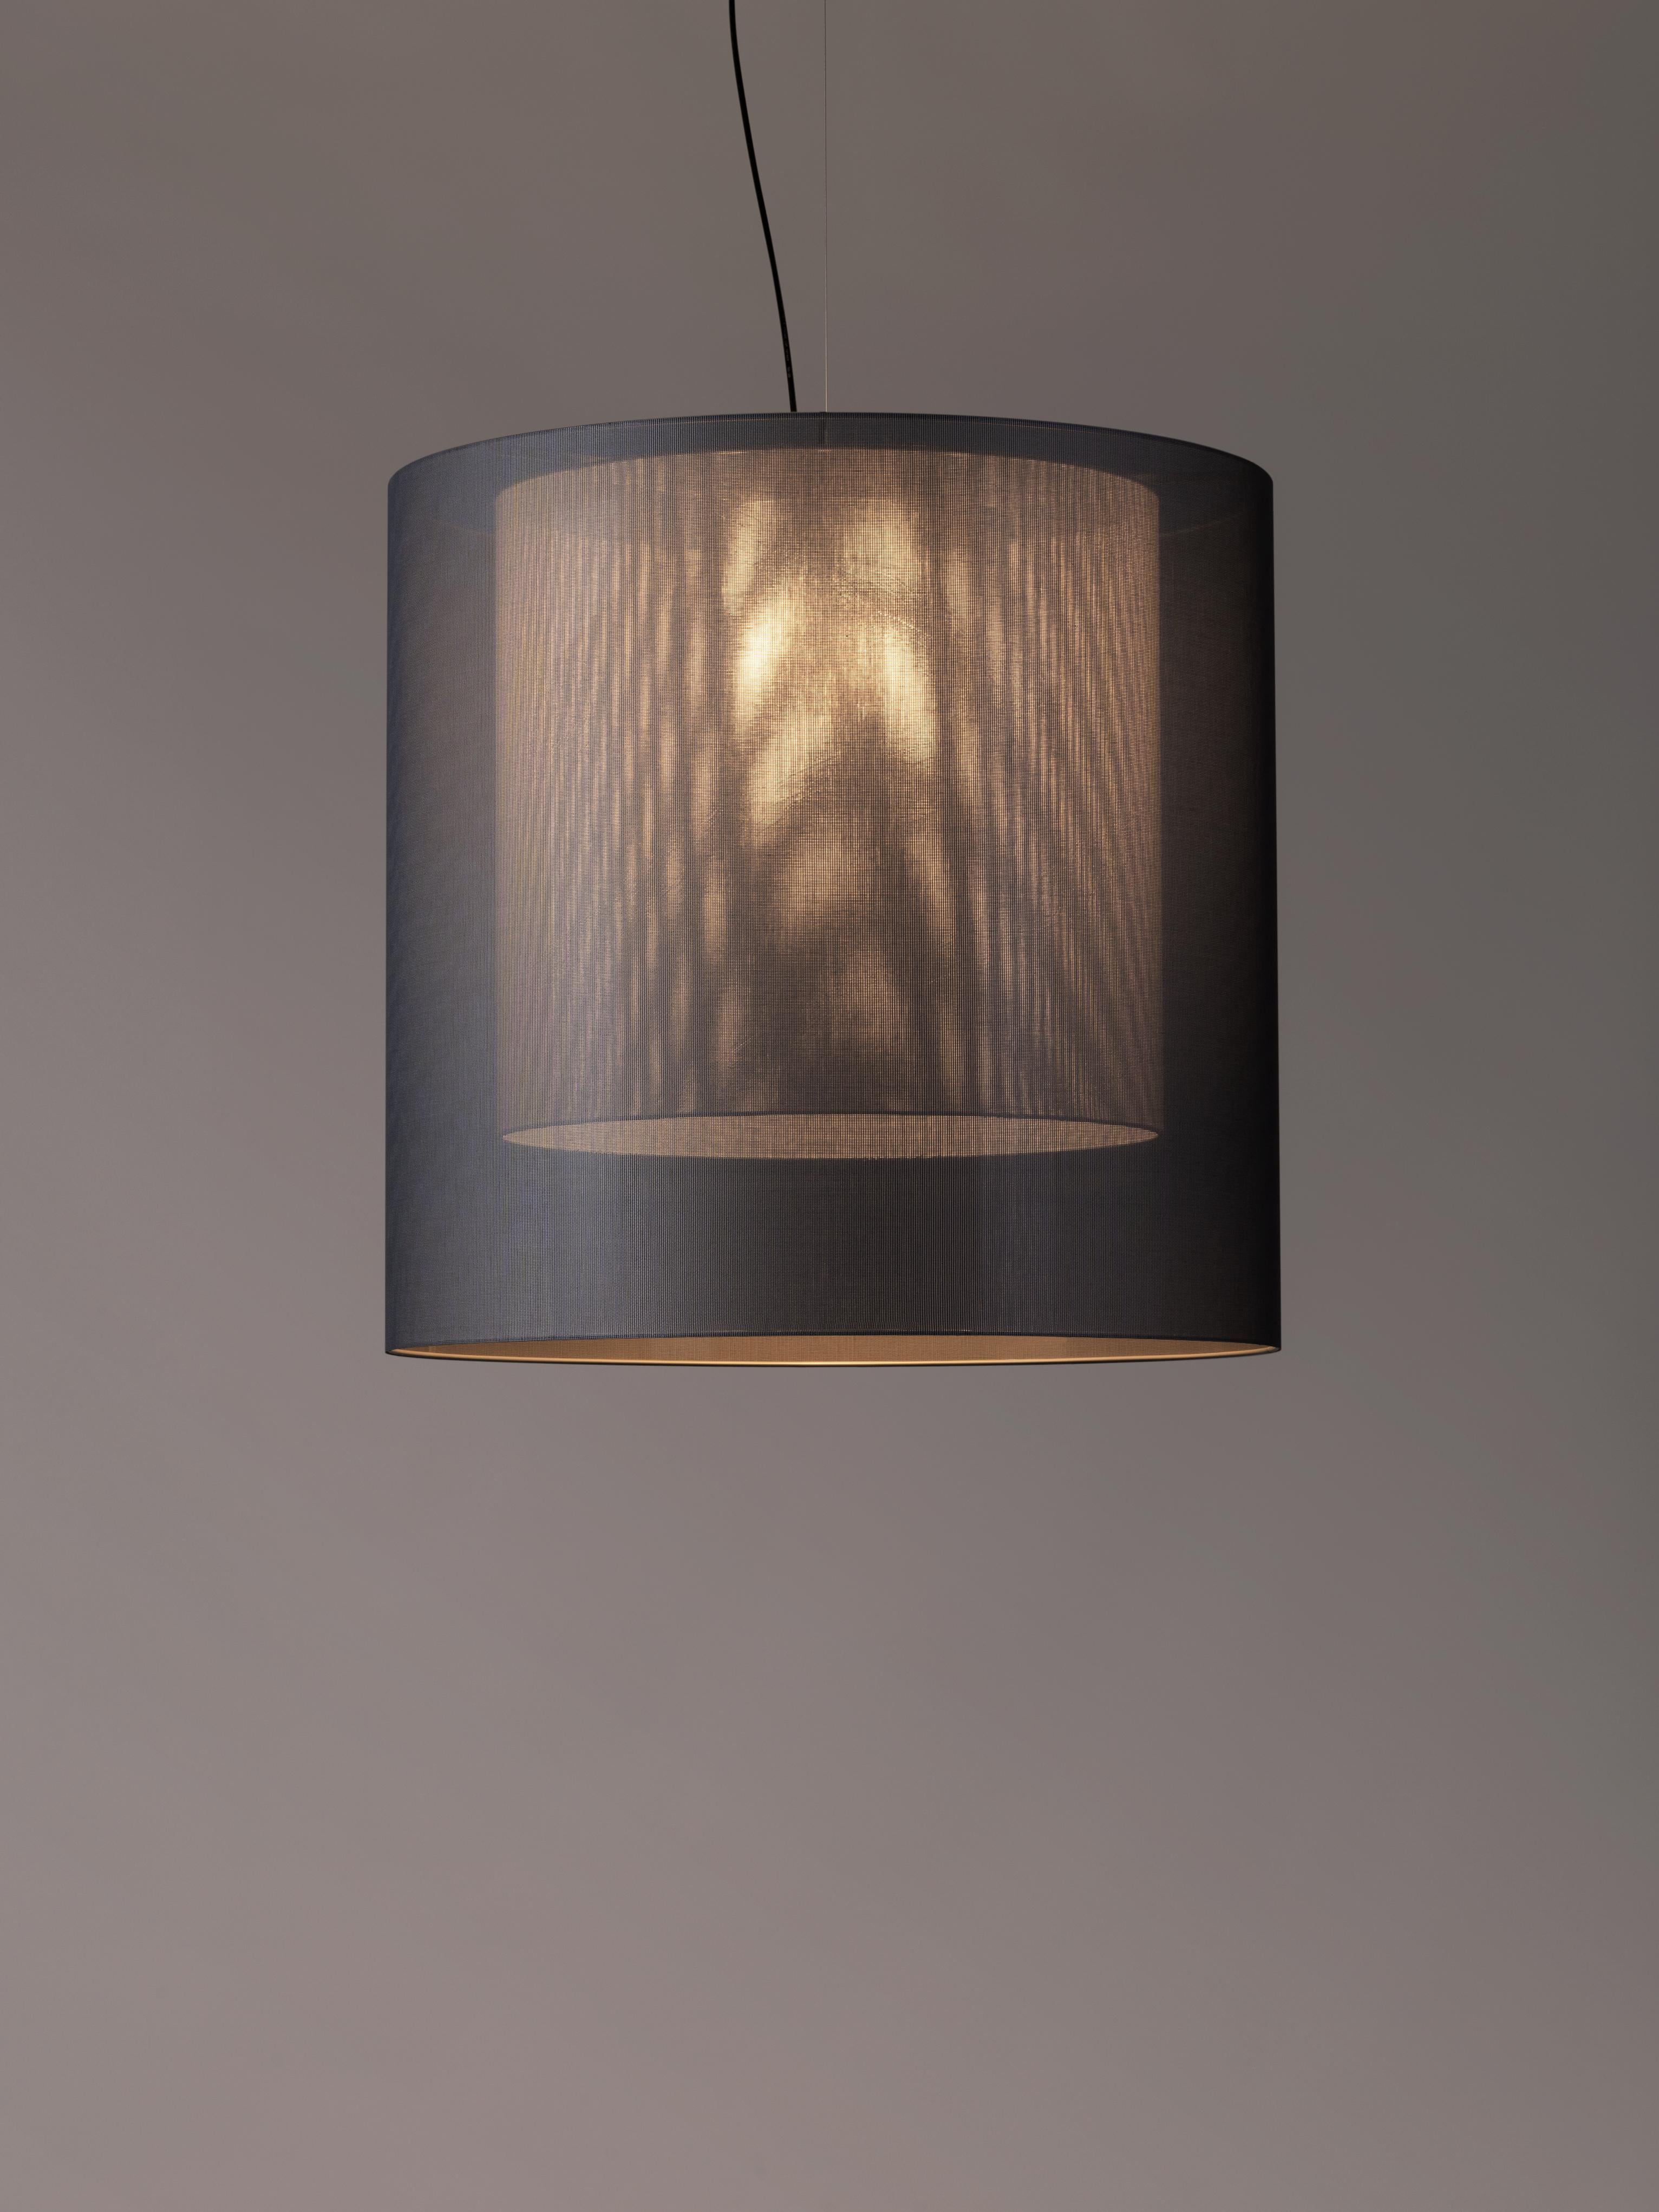 Grey Moaré XL pendant lamp by Antoni Arola
Dimensions: D 83 x H 81 cm
Materials: Metal, polyester.
Available in other colors and sizes.

Moaré’s multiple combinations of formats and colours make it highly versatile. The series takes its name